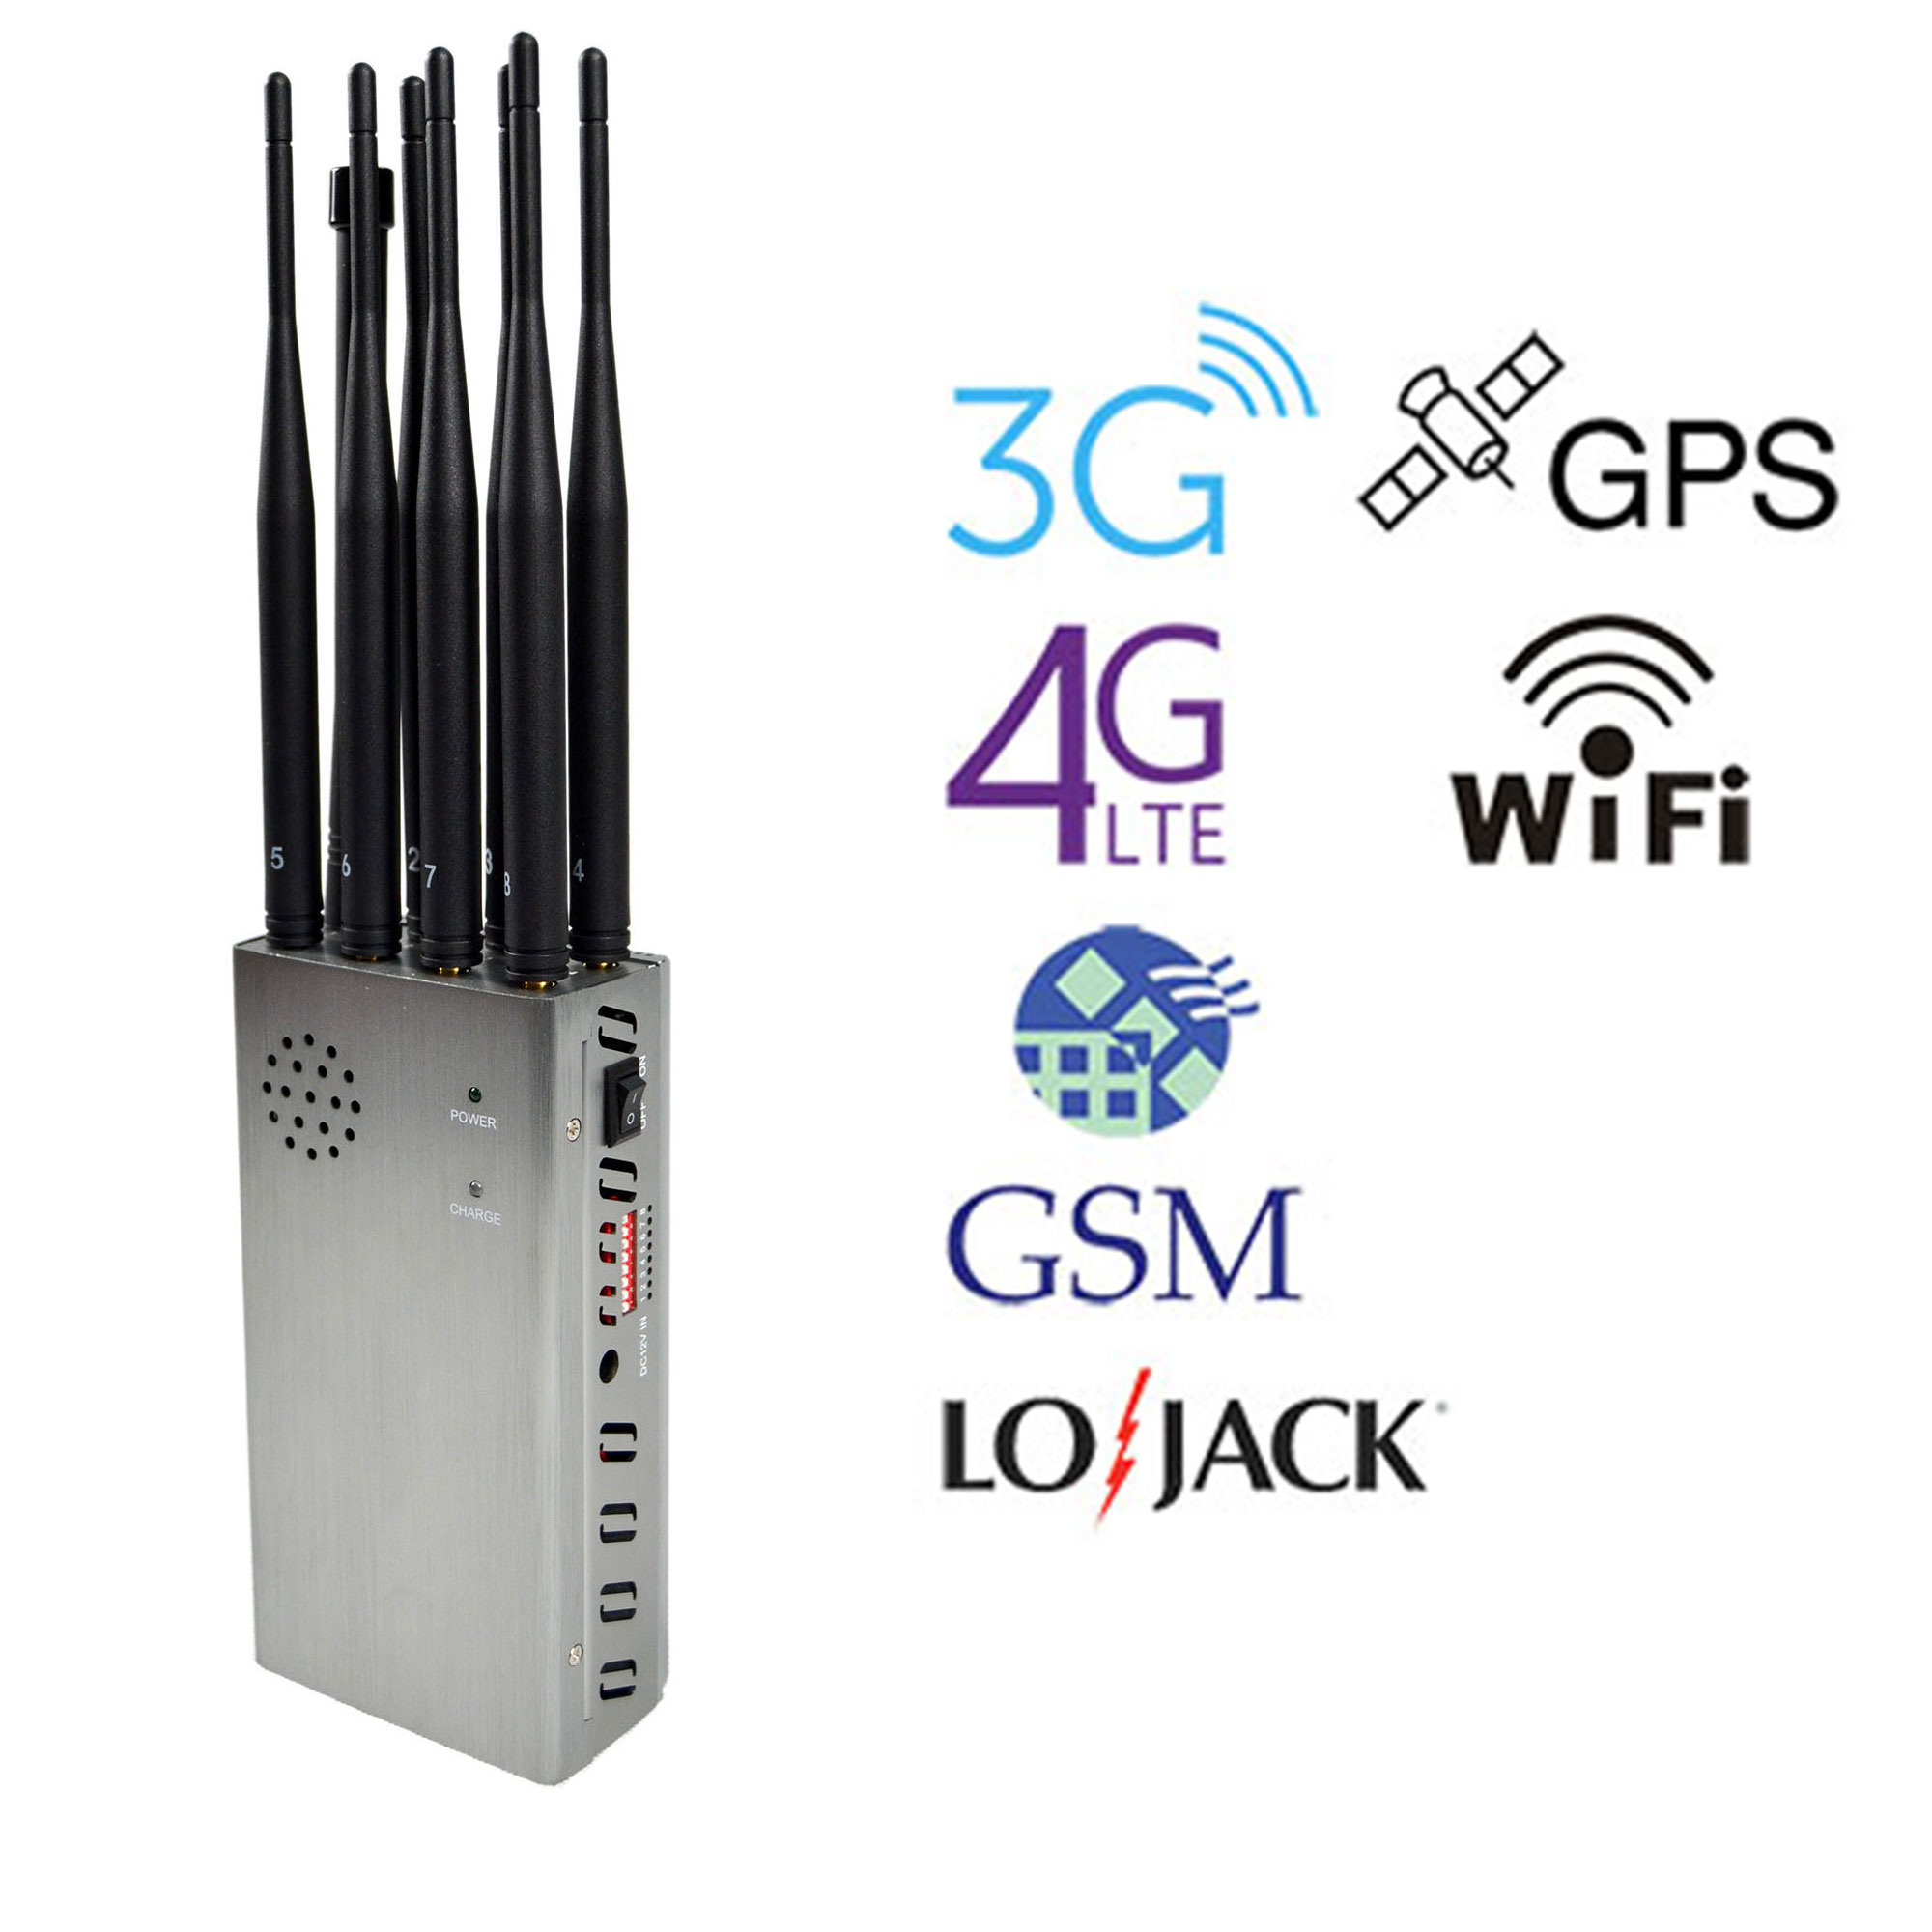 rf jammer kit free , Portable 8 Antennas Cell Phone Jammers With 2g 3G 4G And LOJACK GPS WIFI Signals